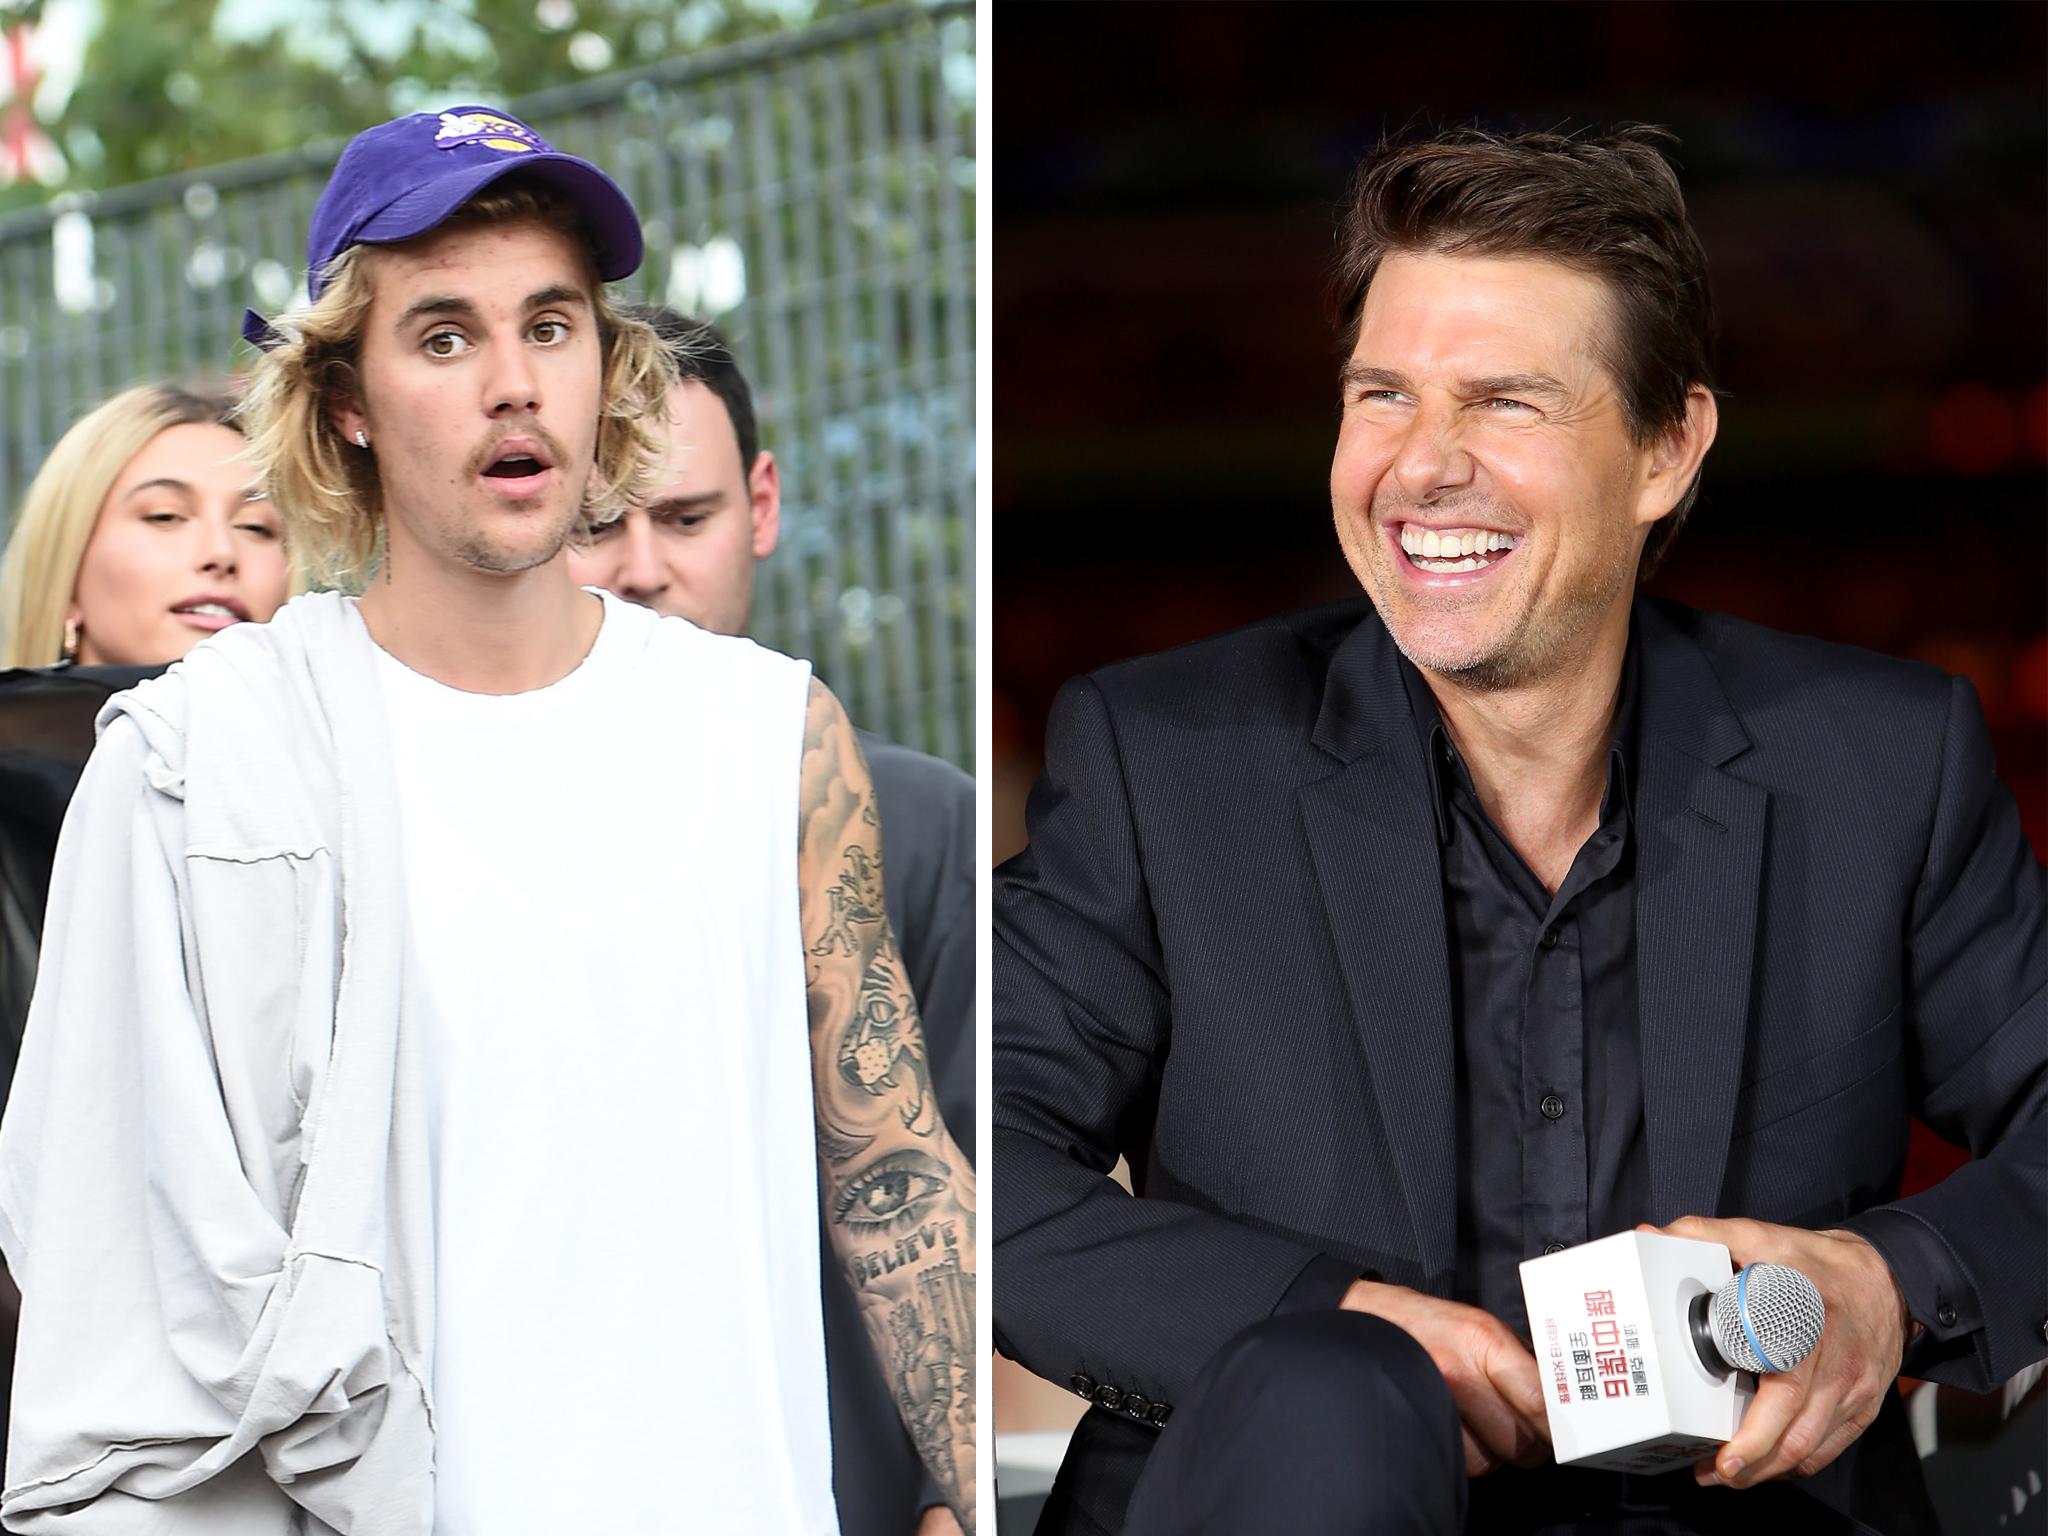 Justin Bieber backtracks on his Tom Cruise MMA fight challenge | The Independent2048 x 1536